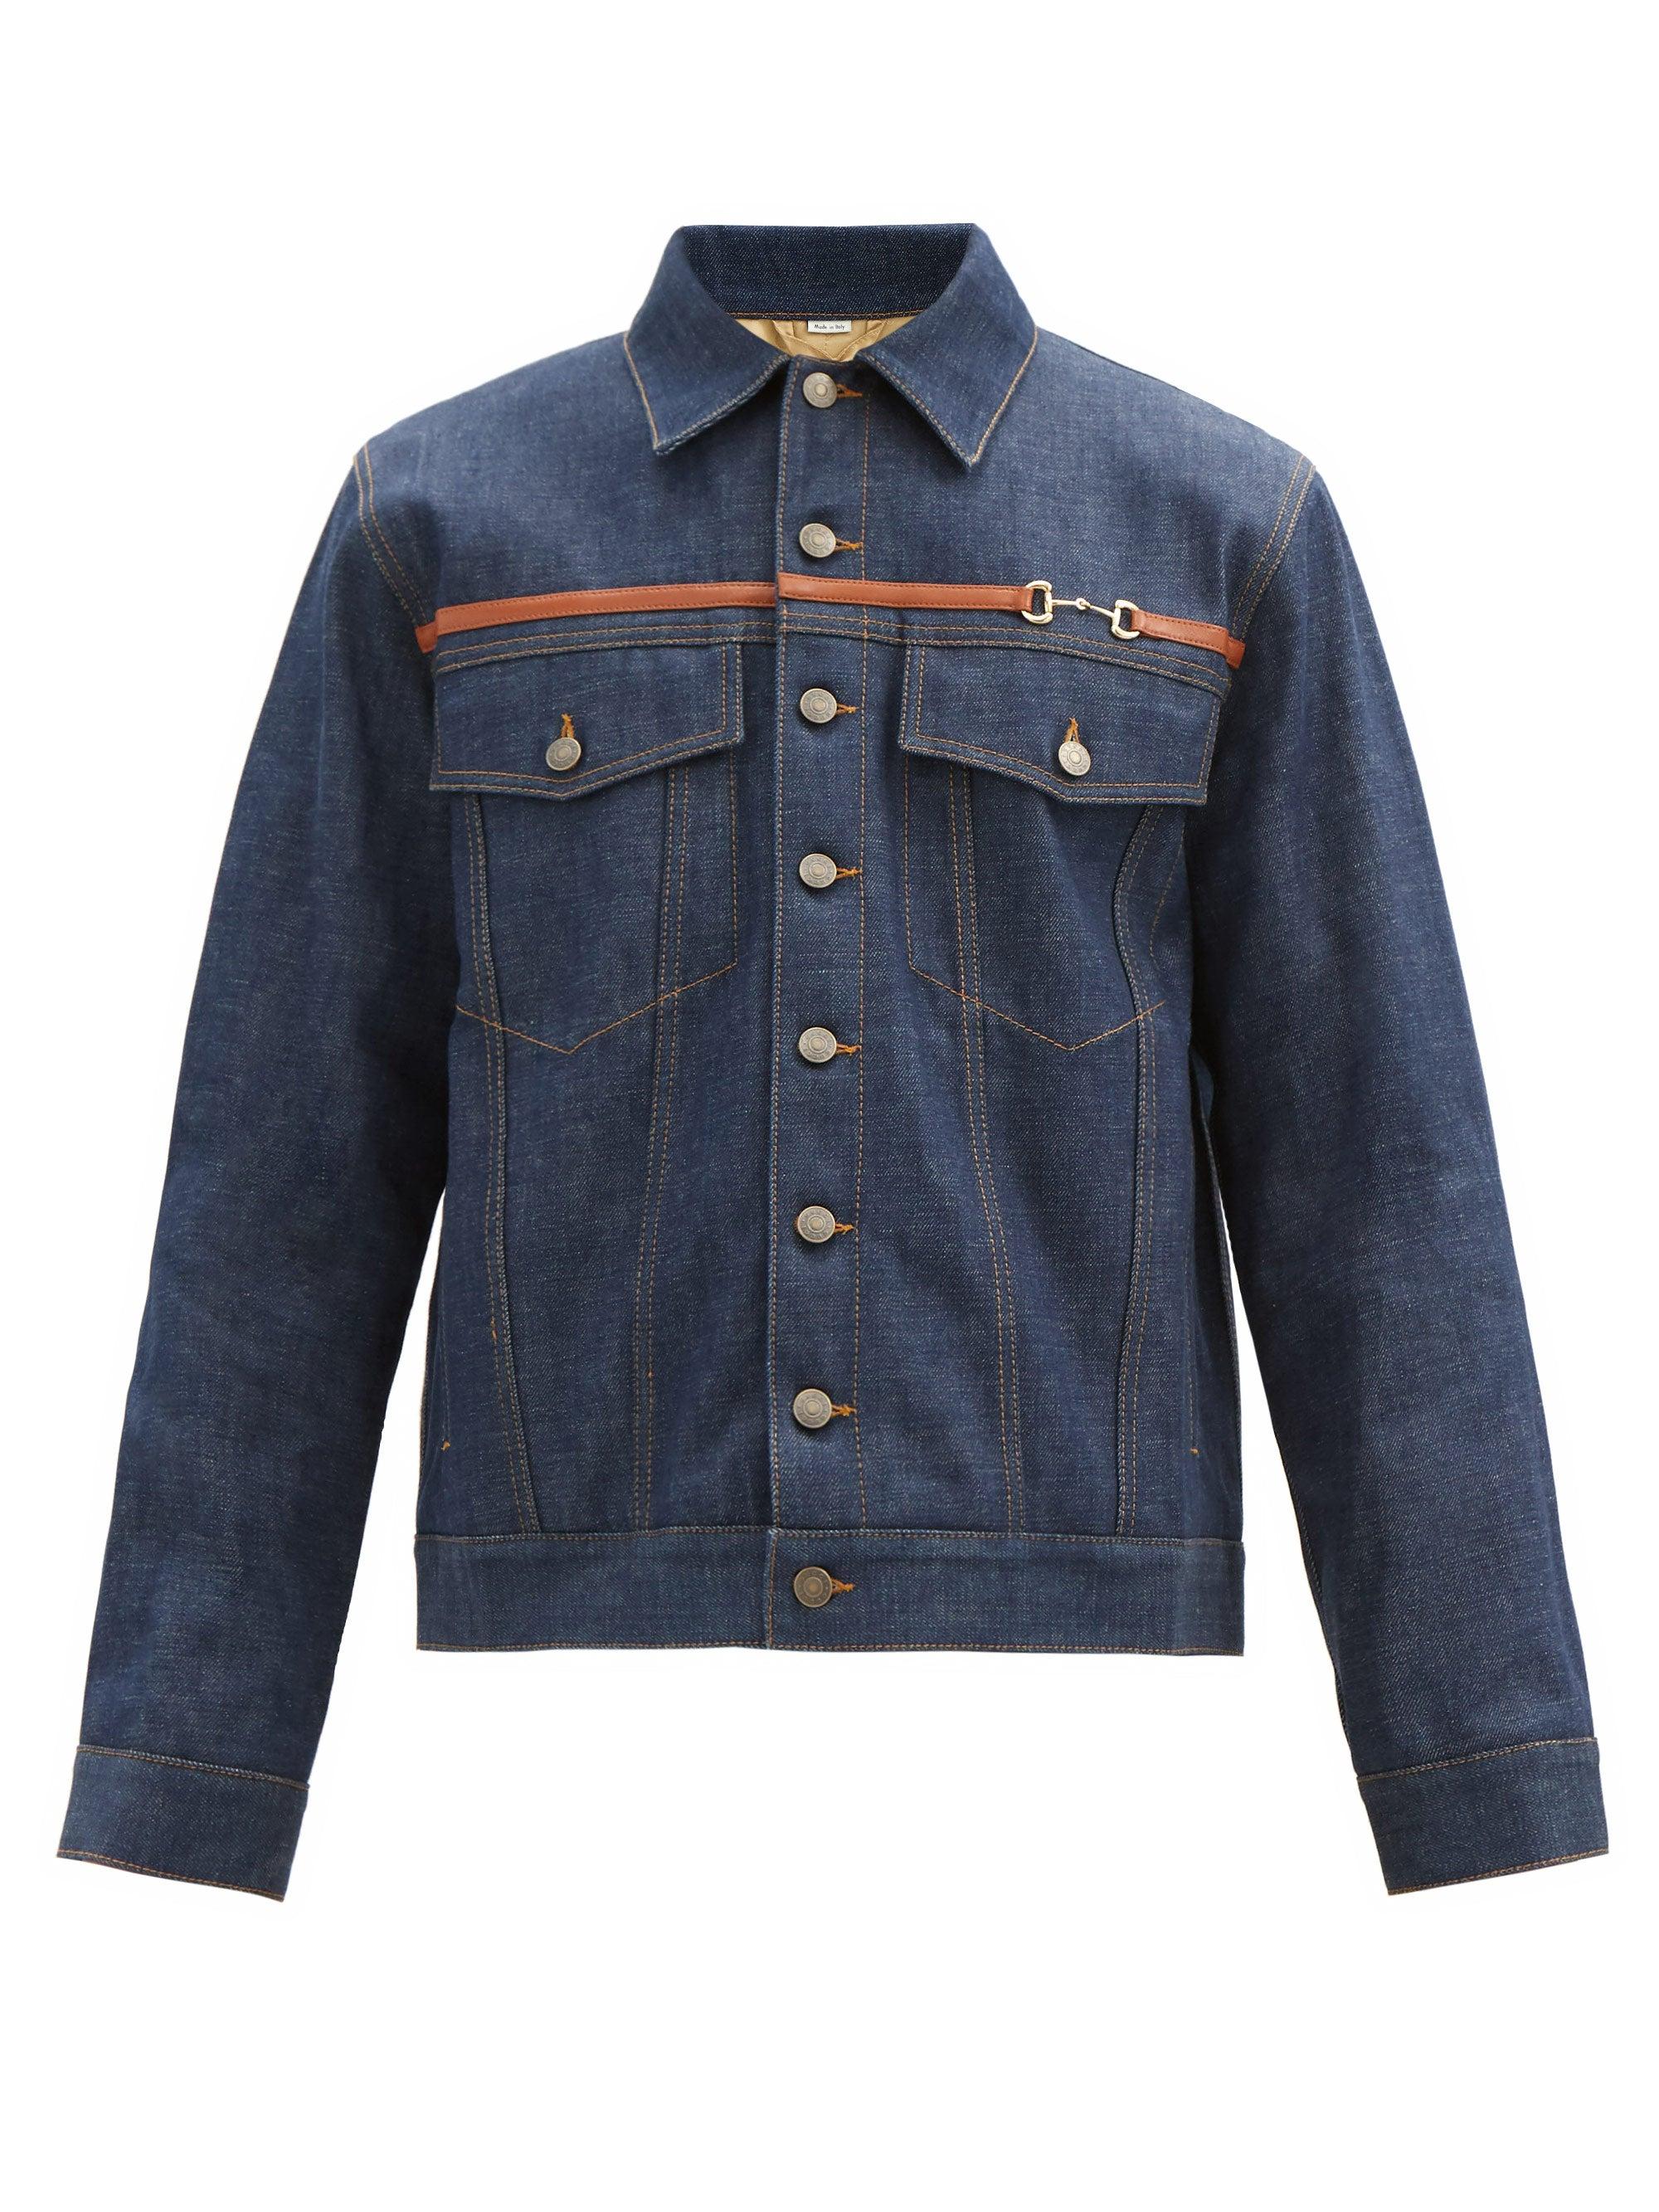 Gucci Washed Denim Jacket With Horsebit in Dark Blue (Blue) for 